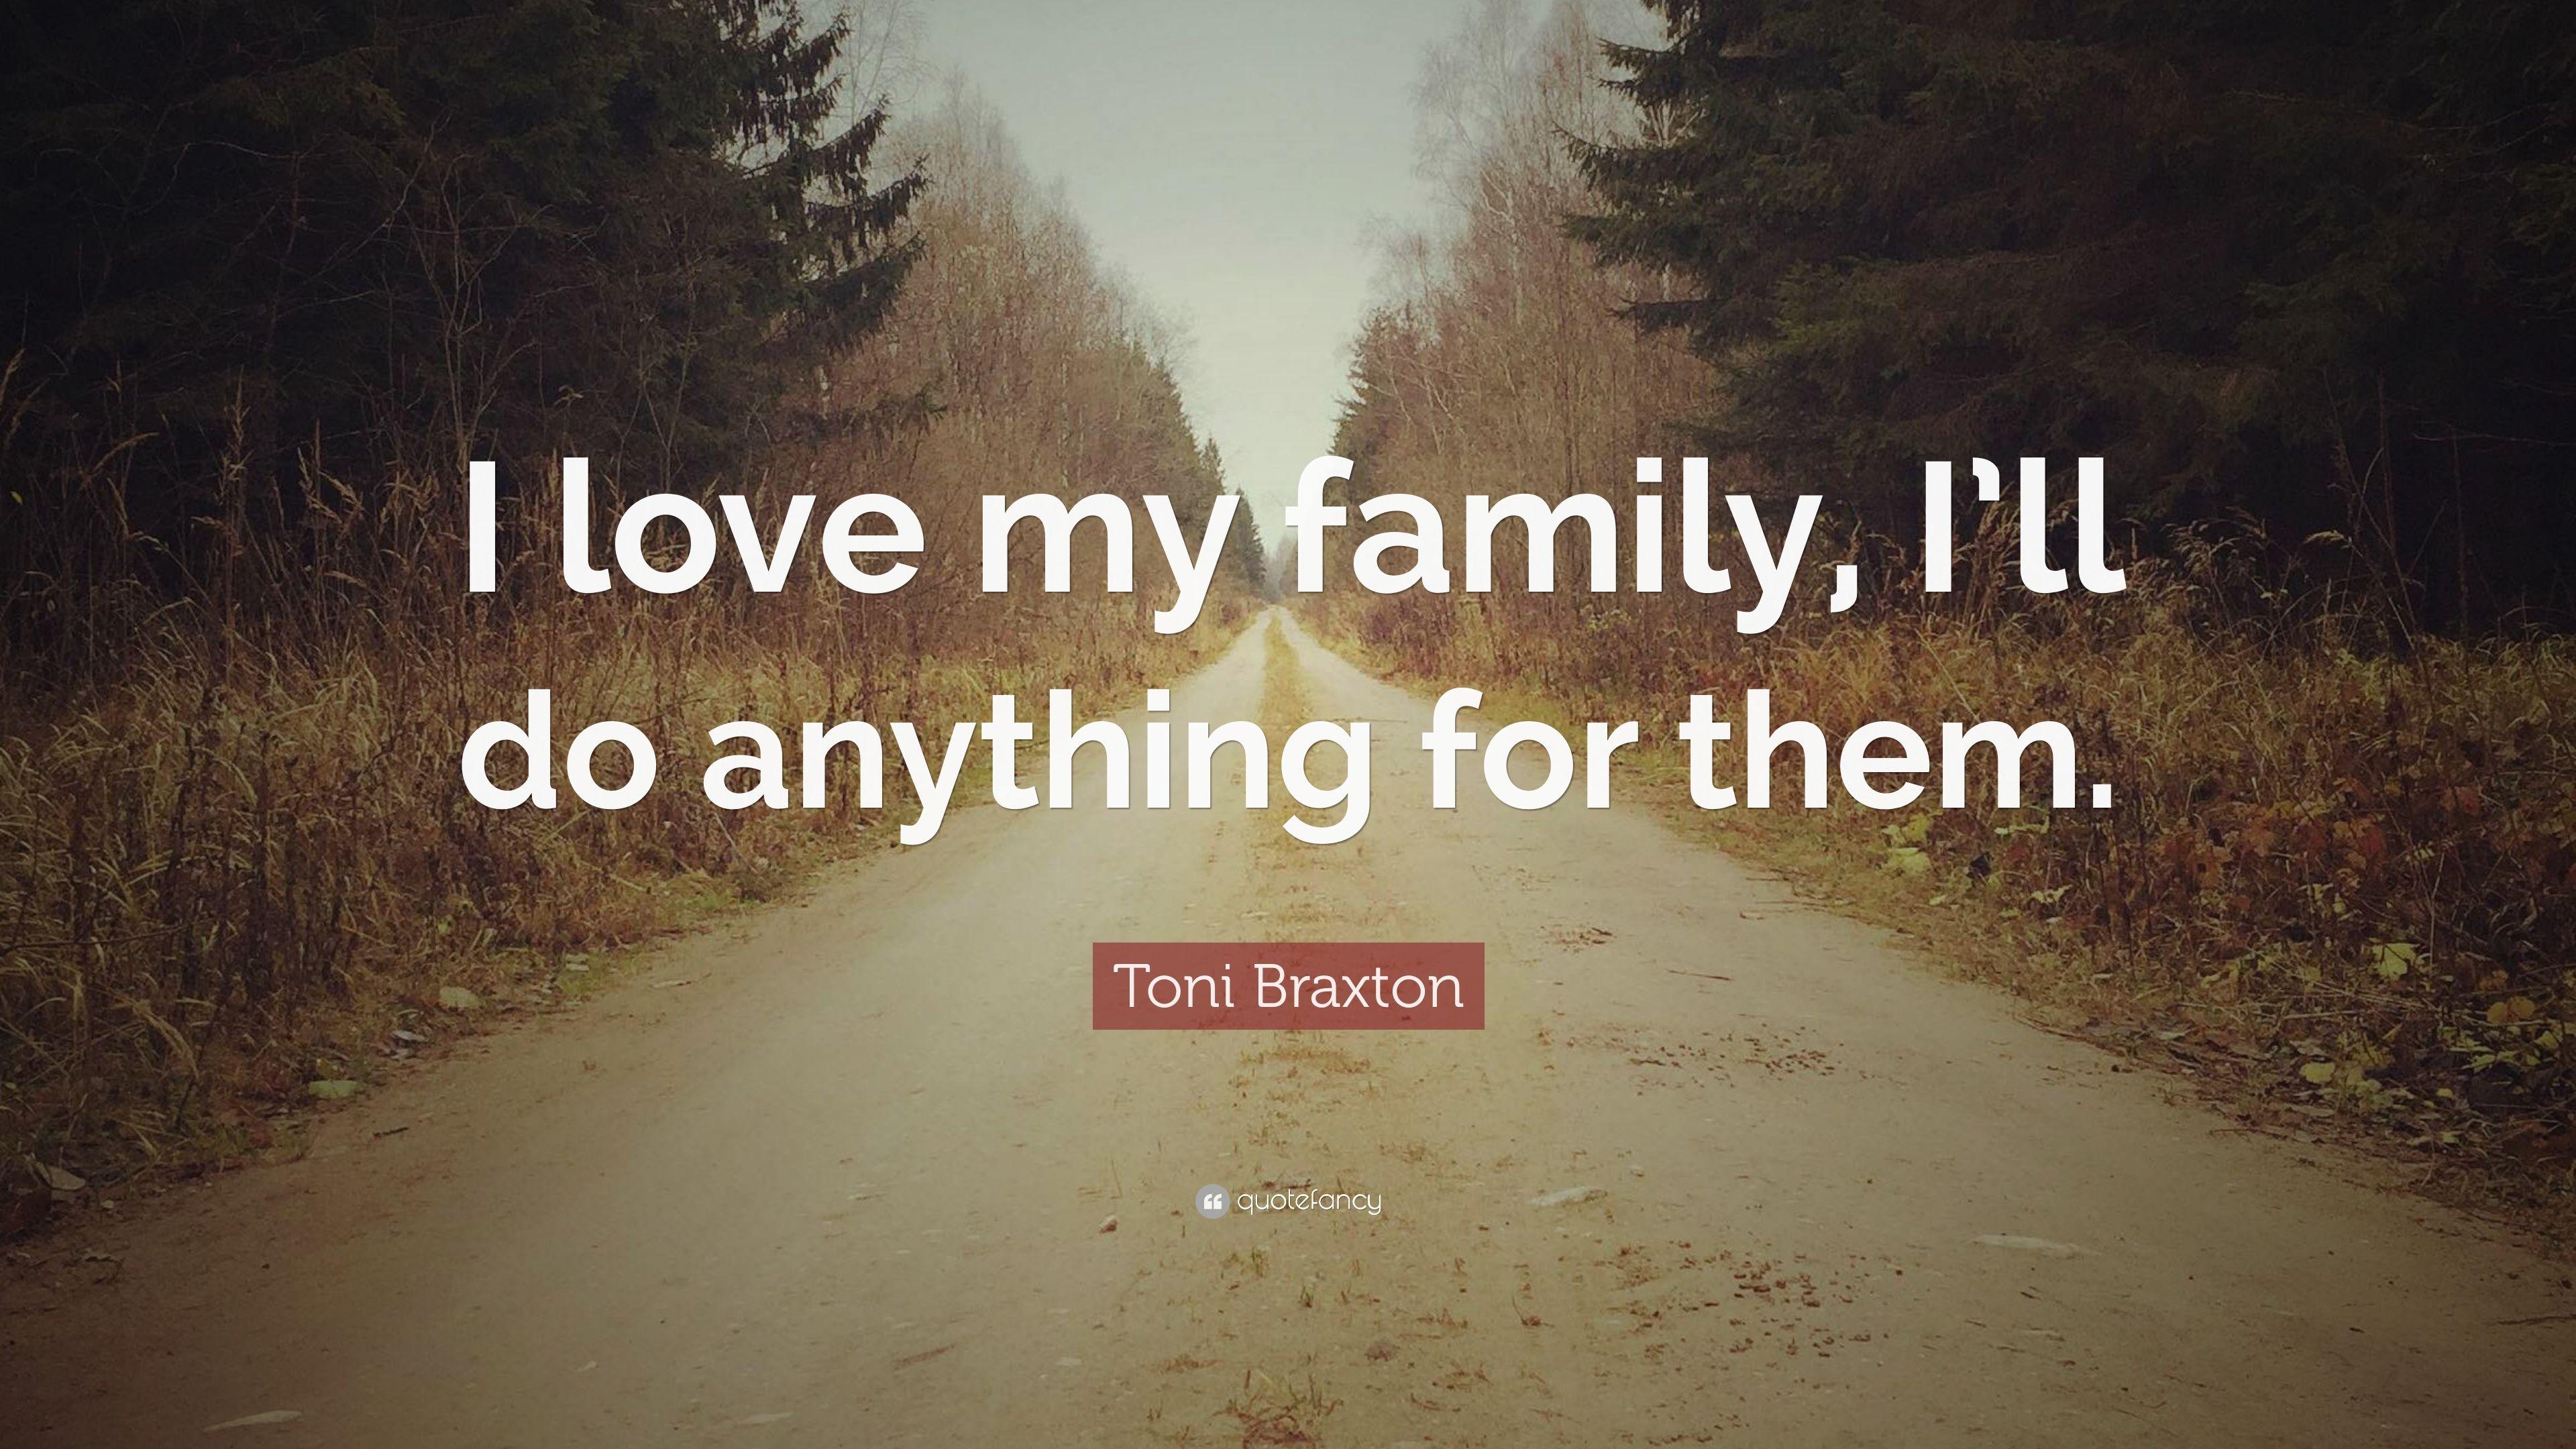 Toni Braxton Quote: “I love my family, I'll do anything for them